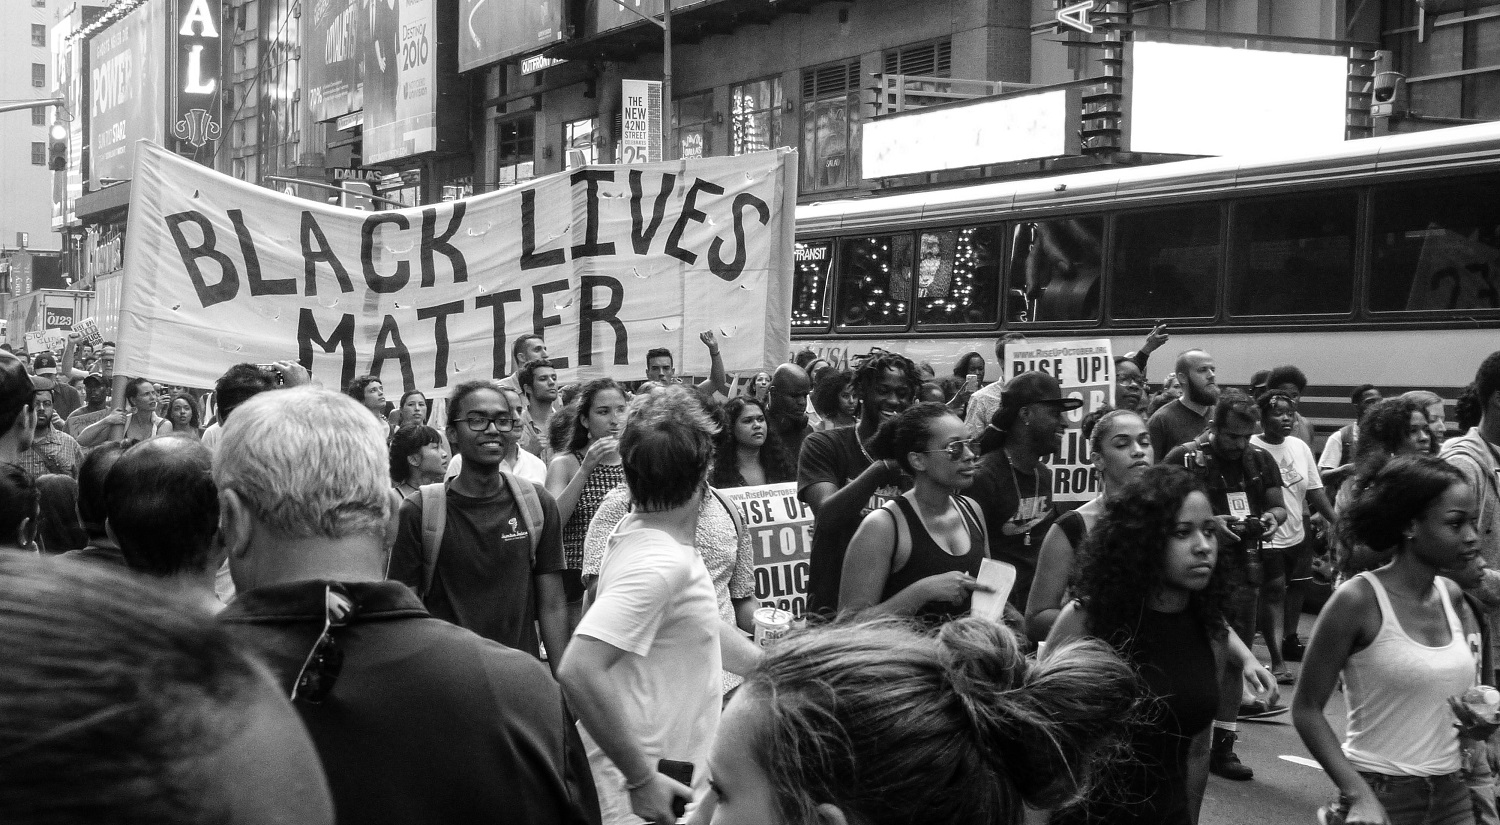 A black lives matter march on a busy street in an American city.